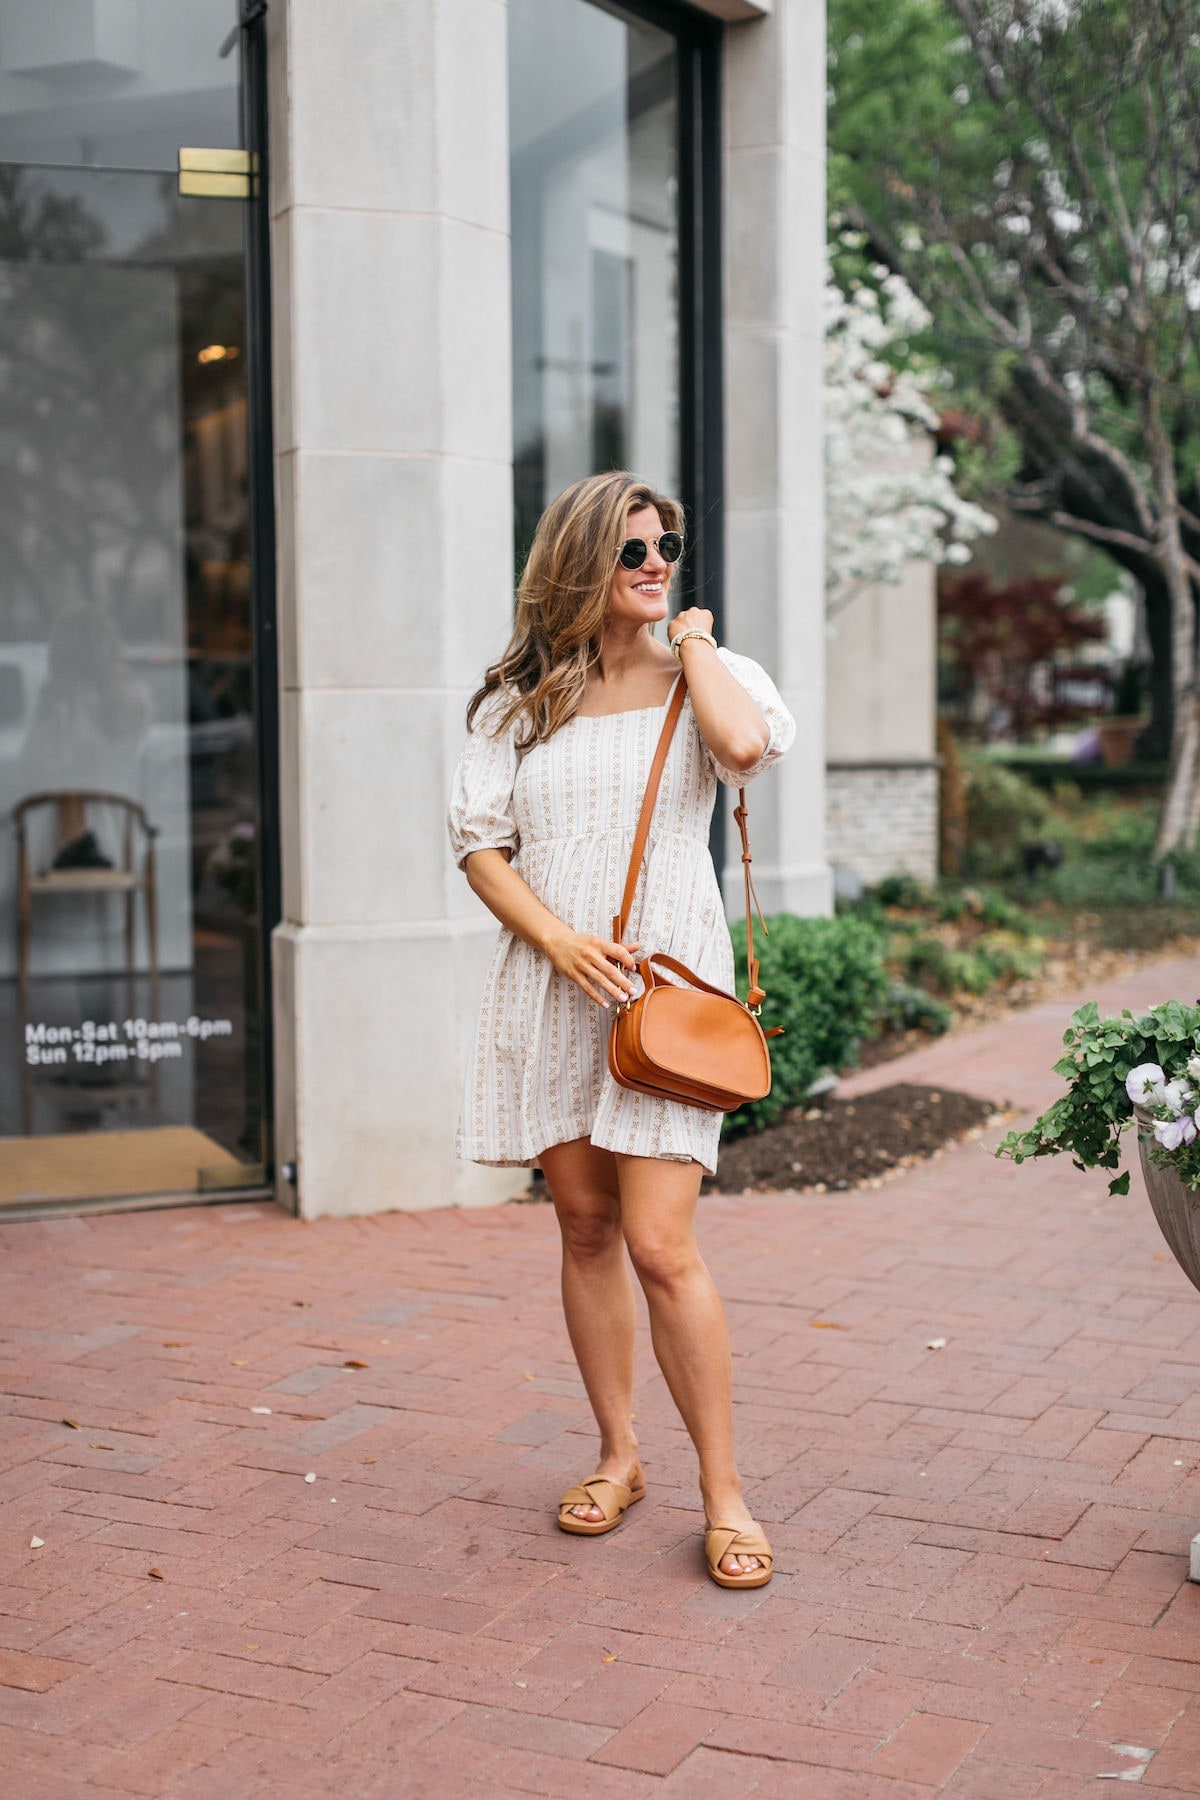 Brighton Butler wearing madewell dress and sandals